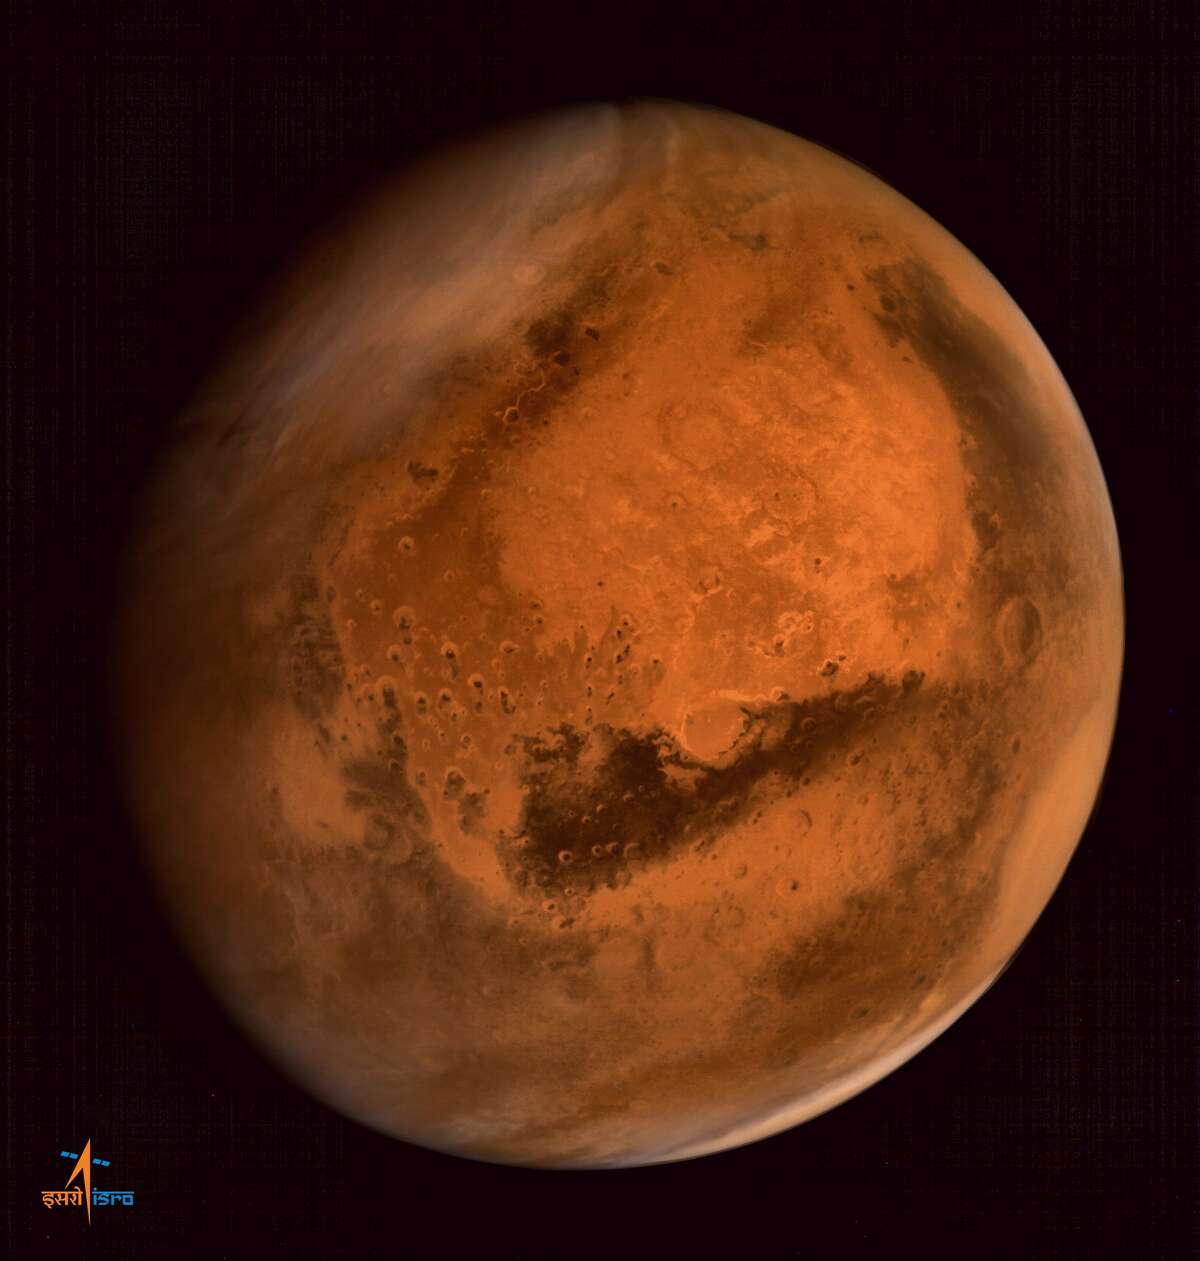 This file handout photograph received from the Indian Space Research Organisation (ISRO) on September 30, 2014, shows the planet Mars in an image taken by the ISRO Mars Orbiter Mission (MOM) spacecraft. A multi-billion-dollar robot dispatched to Mars to search for life must steer clear of promising "hot spots" for fear of spreading microbes from Earth, NASA project scientists said October 1, 2015. AFP PHOTO / ISRO